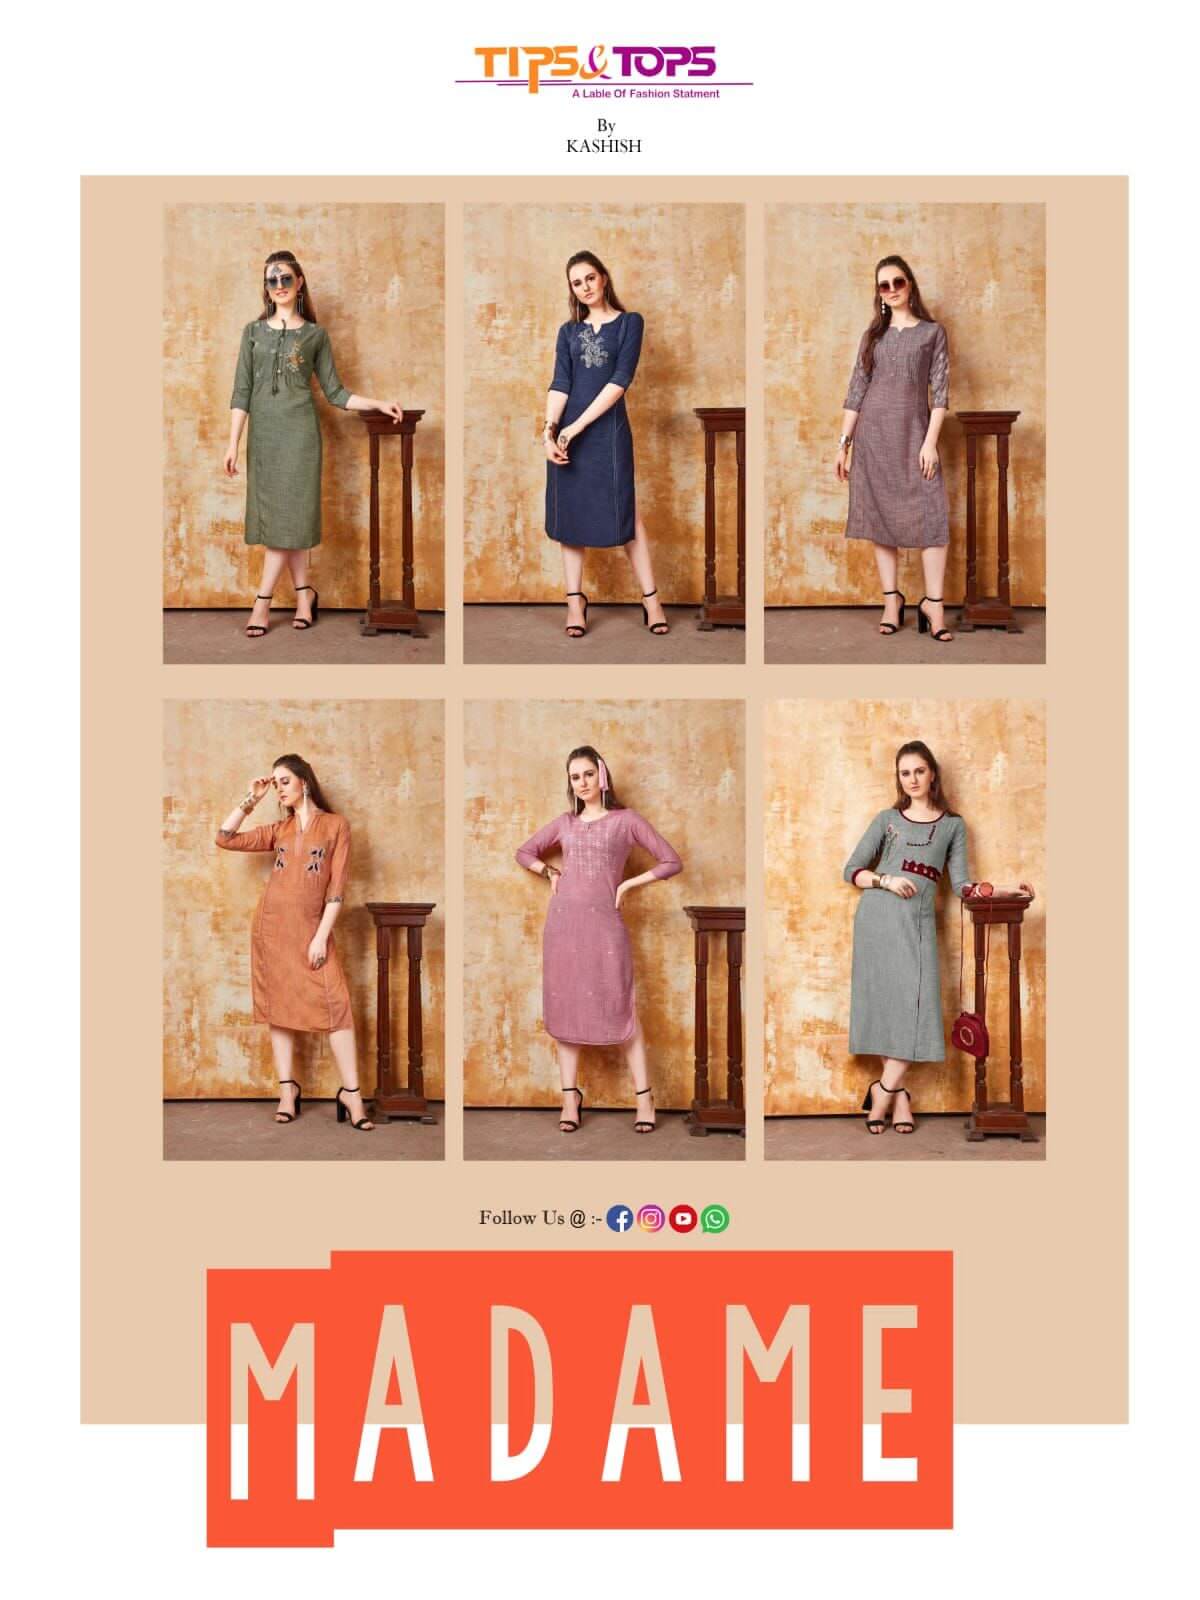 Tips And Tops Madame collection 1